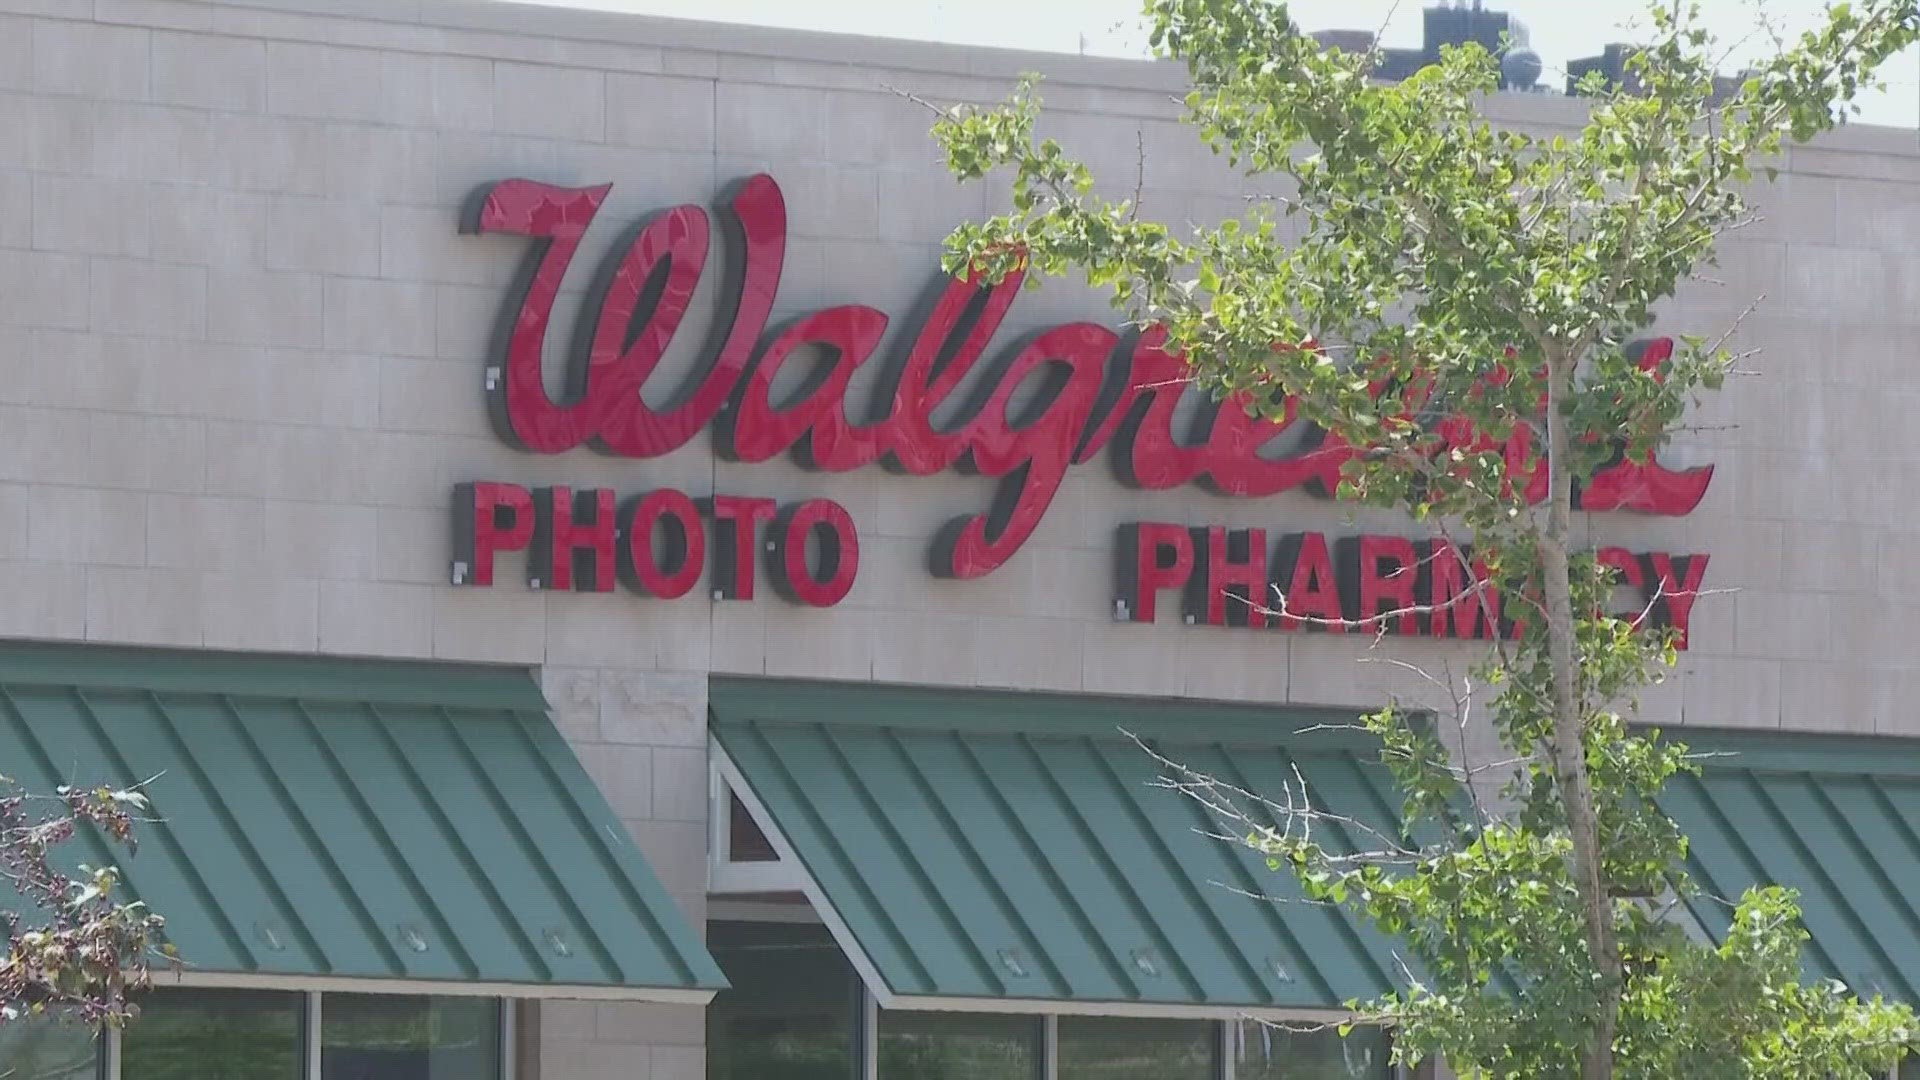 Portland Police Chief Mark Dubois said the Portland threat was among several made against Walgreens stores in Maine, adding police are taking the threats seriously.